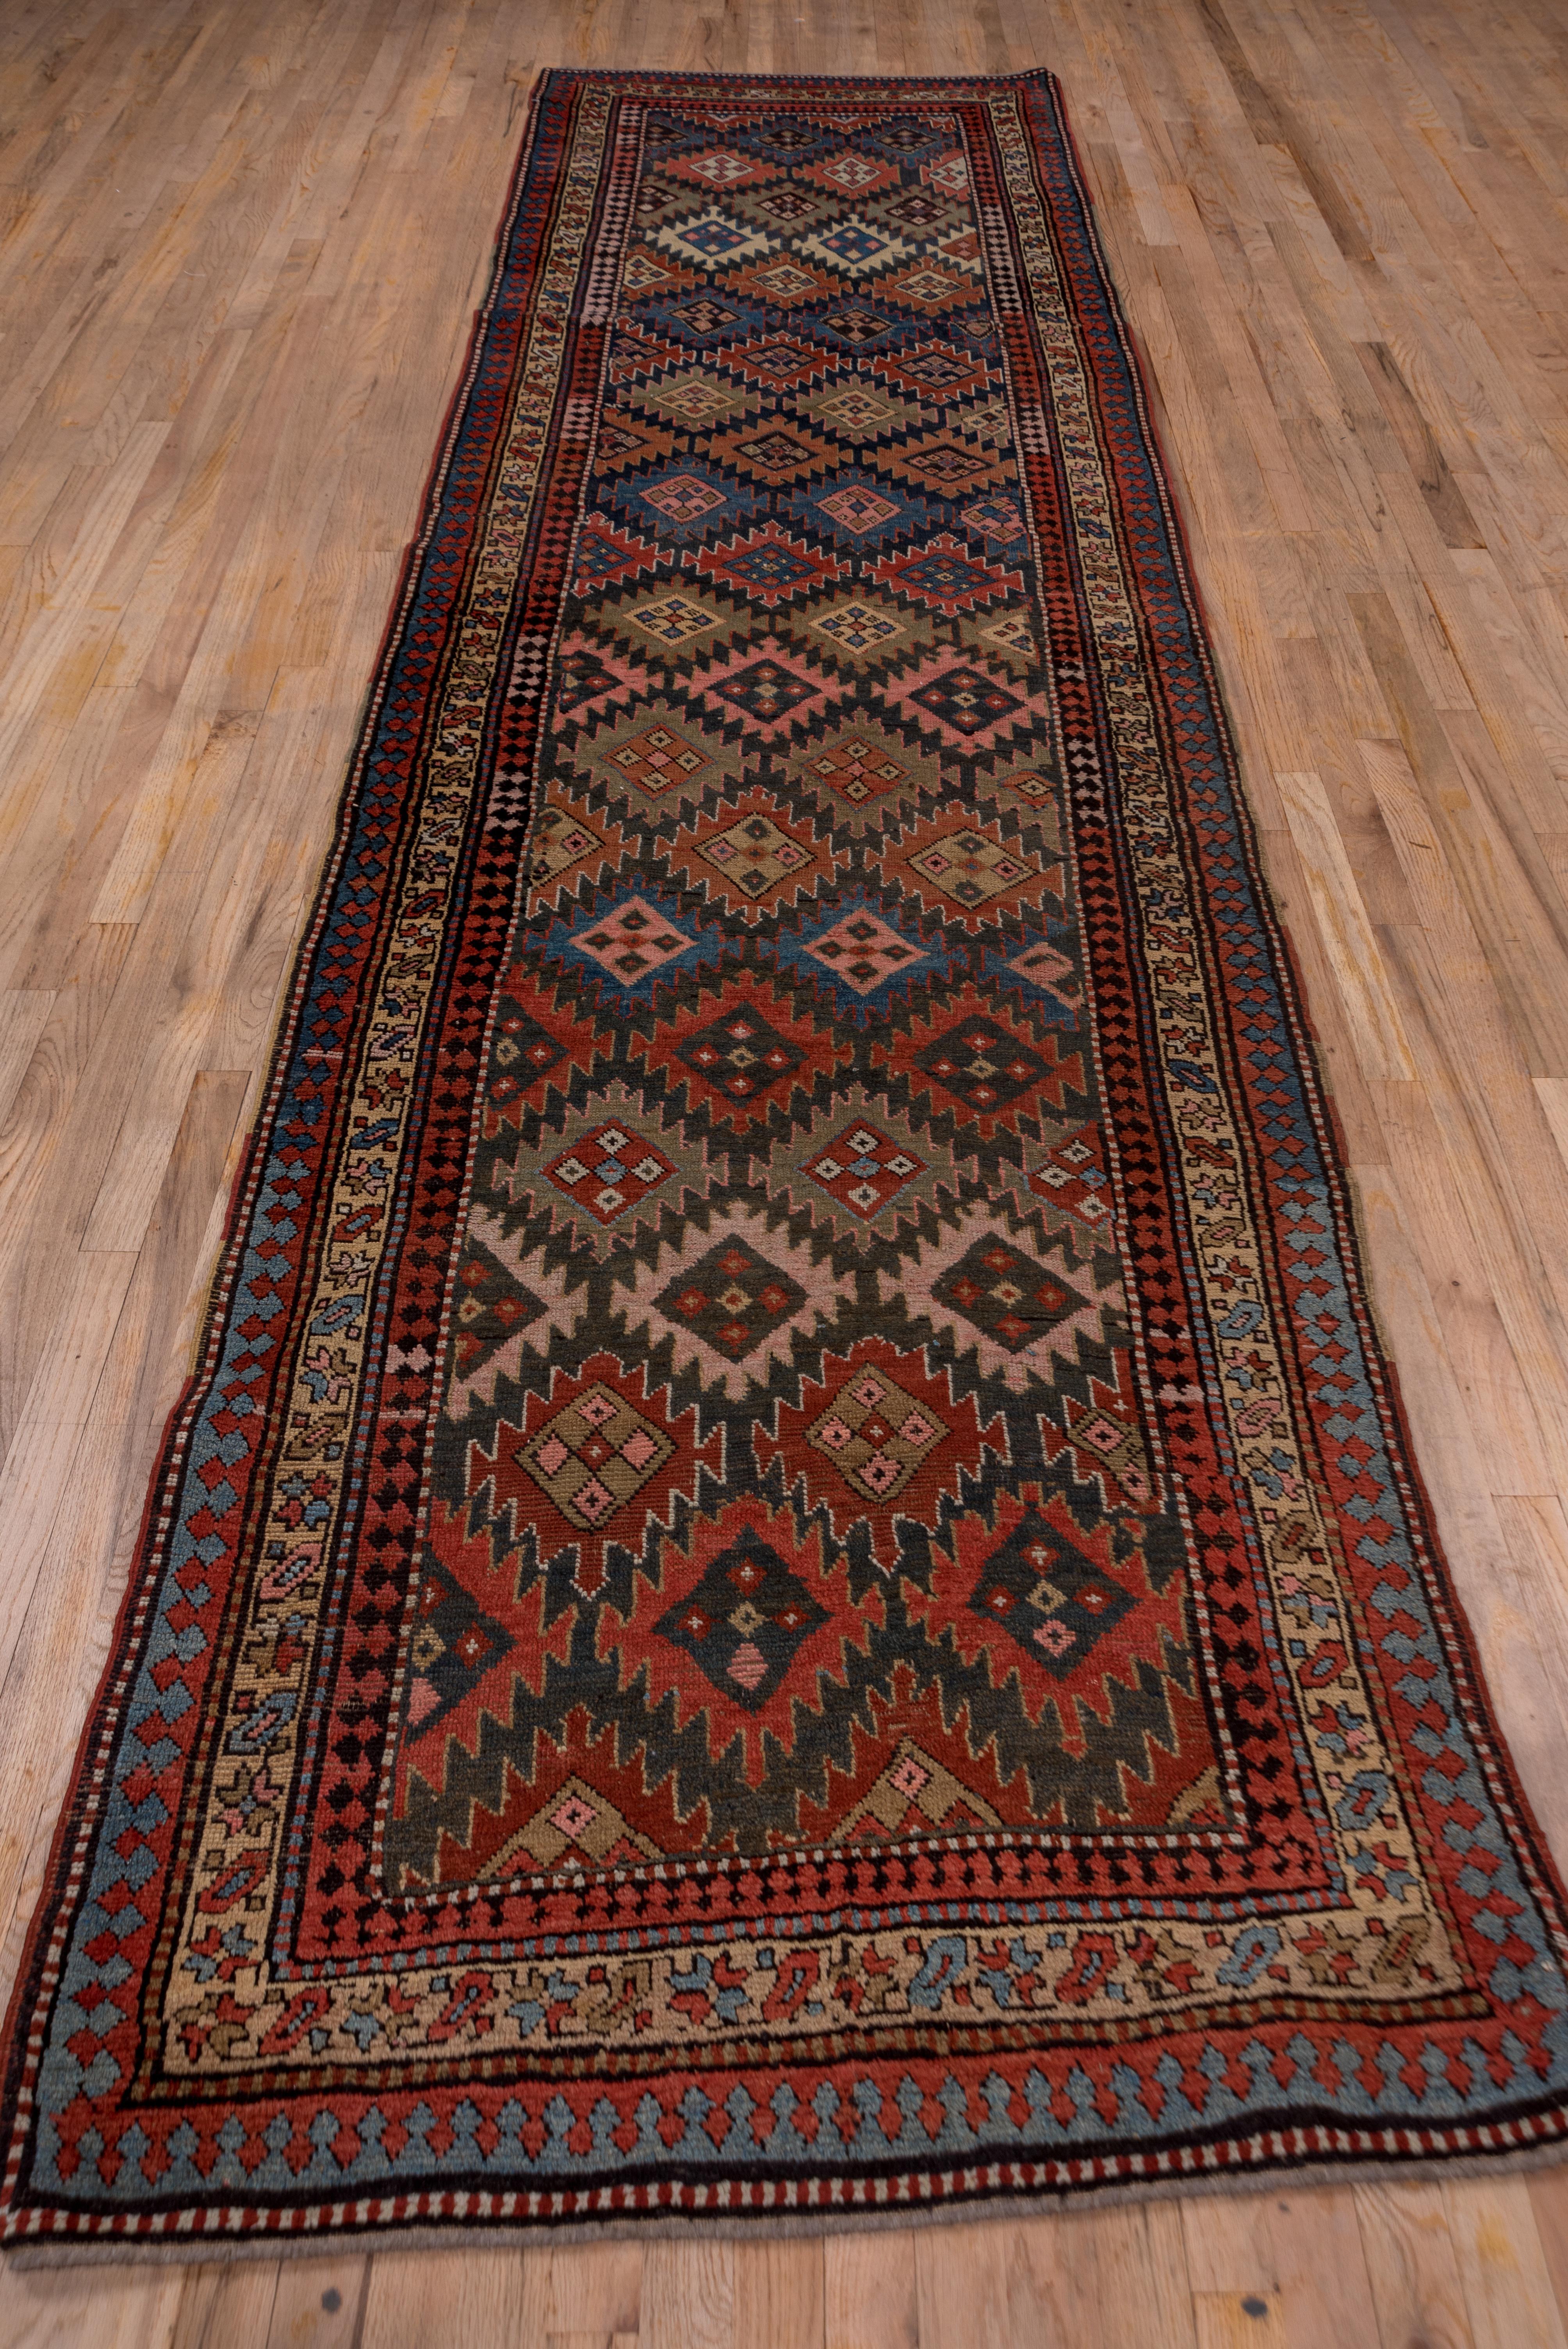 The bottle green ground displays colorful medallions in red, mustard, blue, coral and pale green. This medium coarse southern Caucasian runner has a central ivory star and diagonal border between reciprocal keyhole guards. A generally attractive